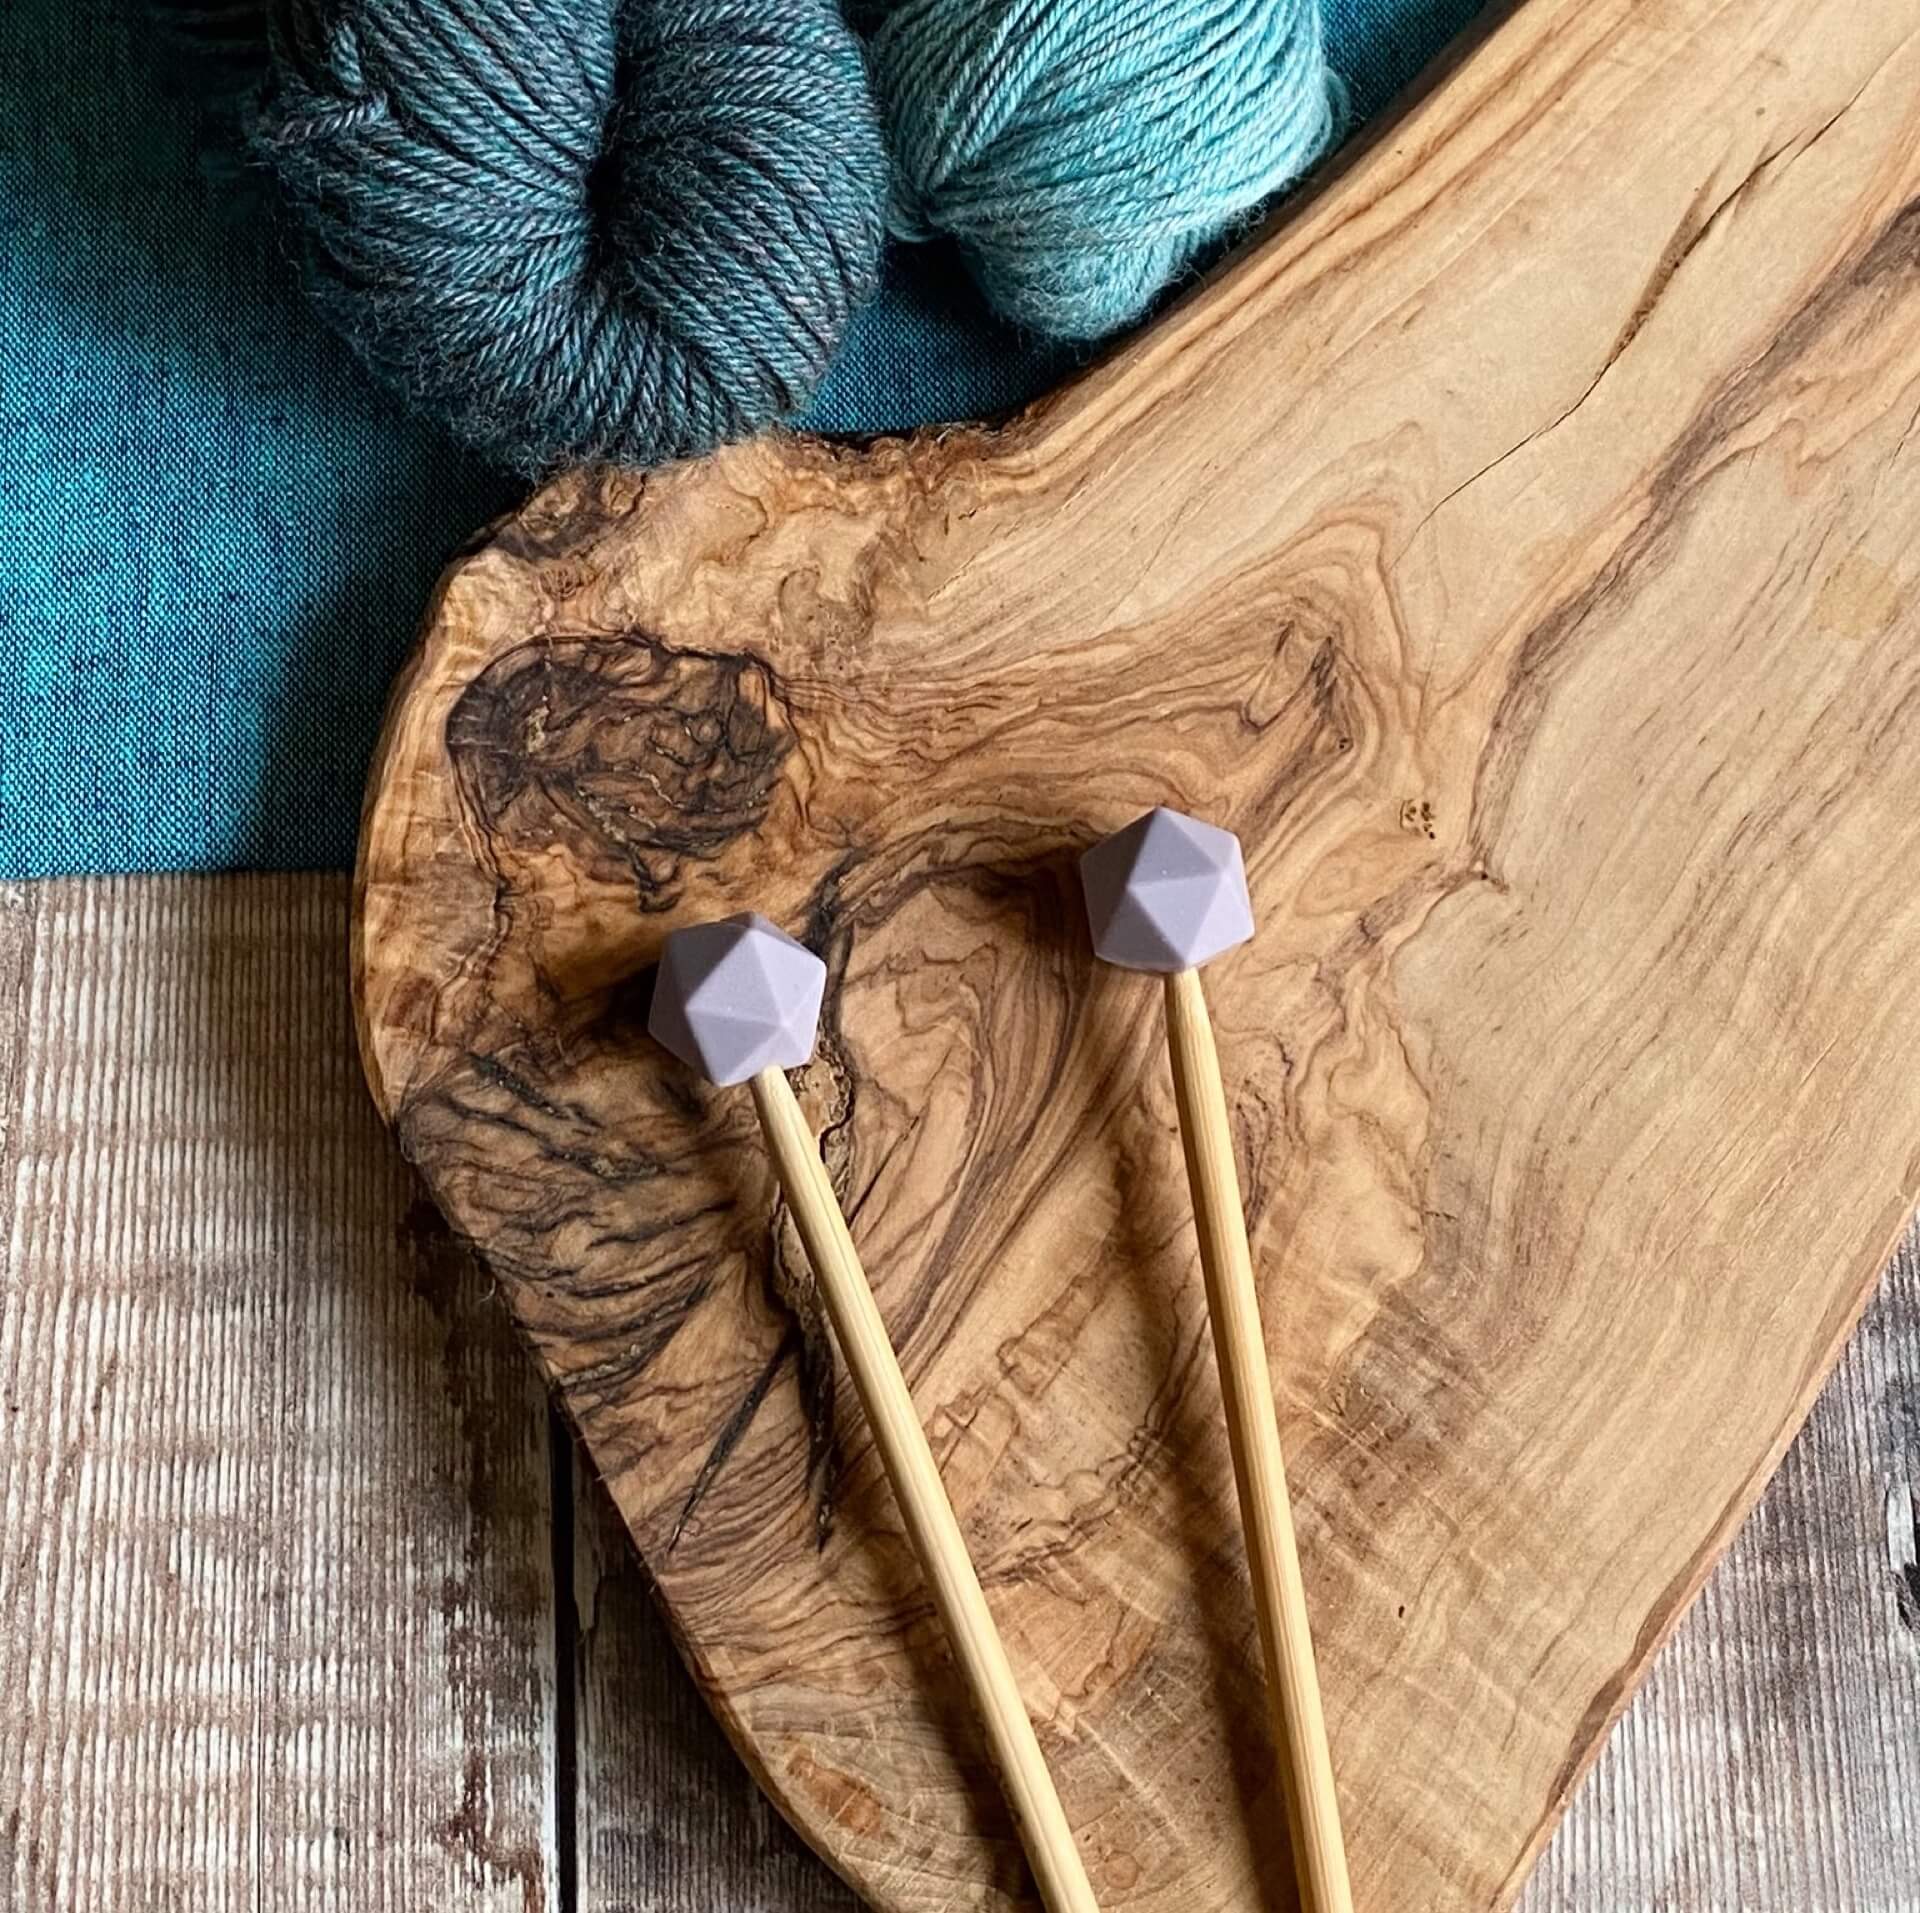 Mulberry needle protectors to stop stitches escaping from knitting needles. A pair sit on a wooden table attached to knitting needles. 